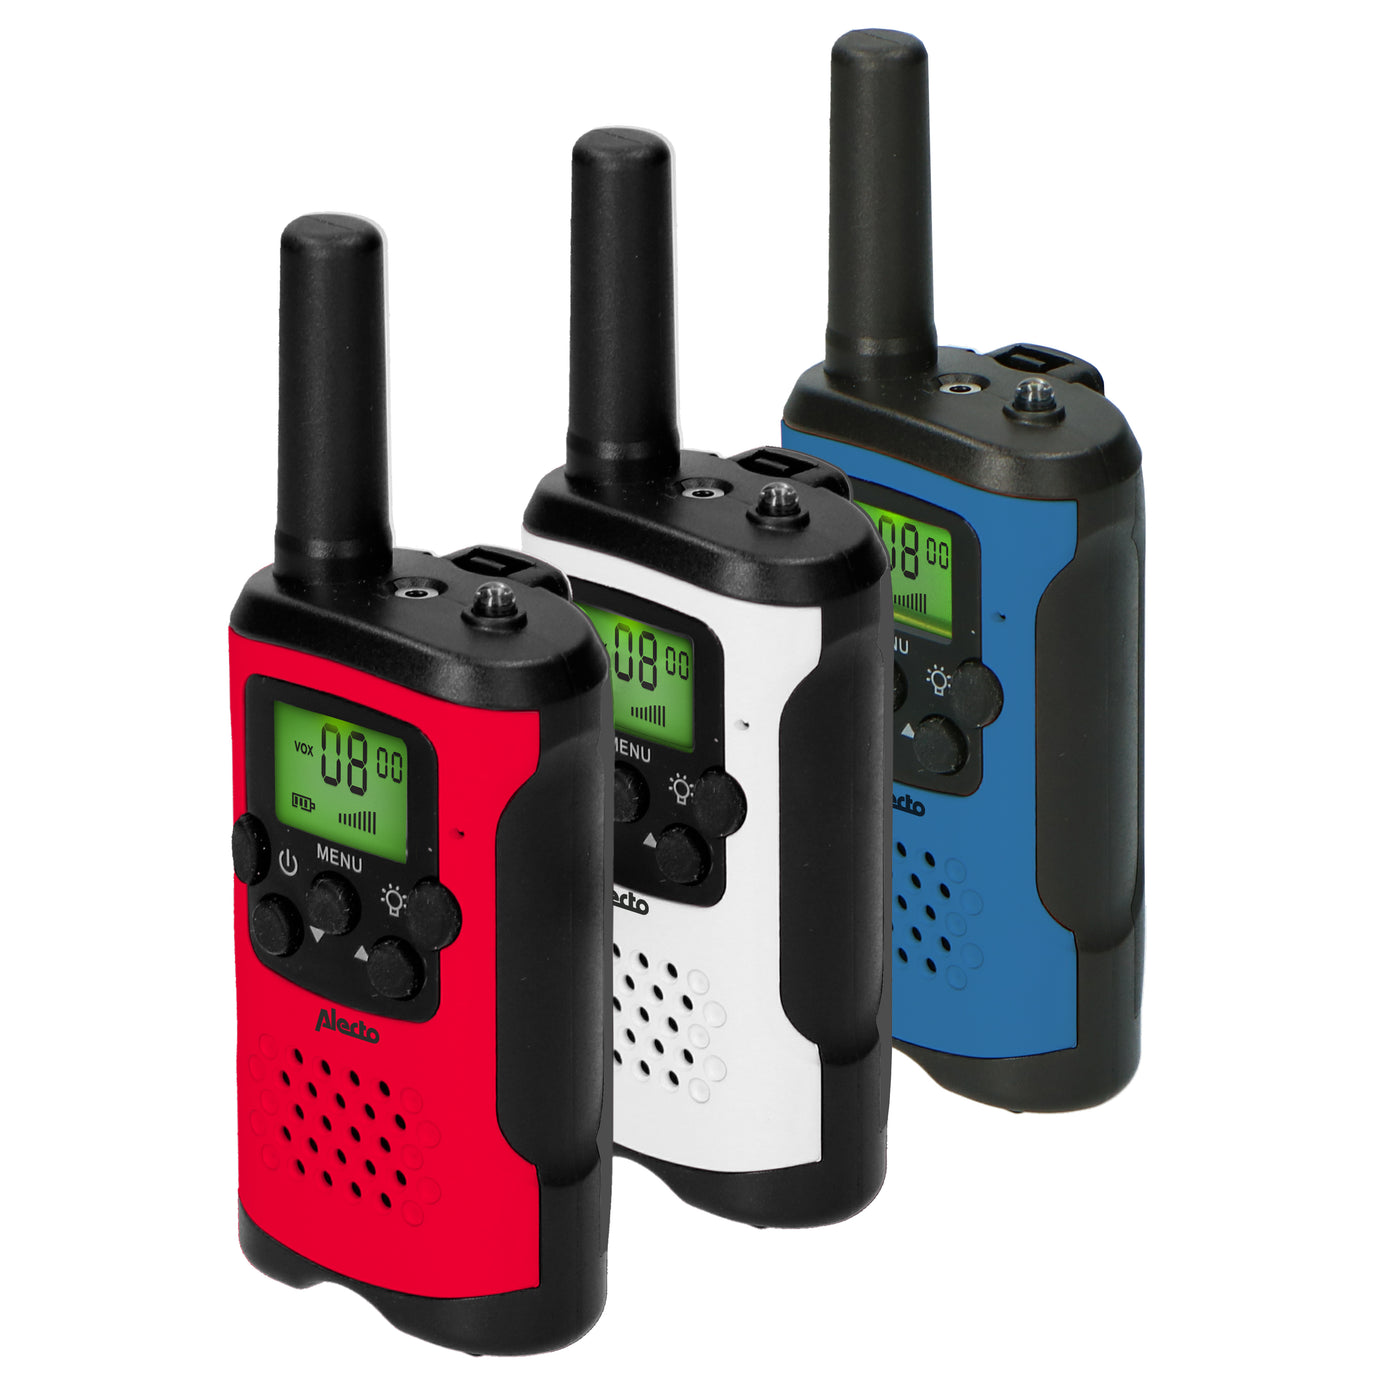 Alecto FR113 3x - Set of two three Two-Way radios for children, range up to 7 kilometers, red-white-blue